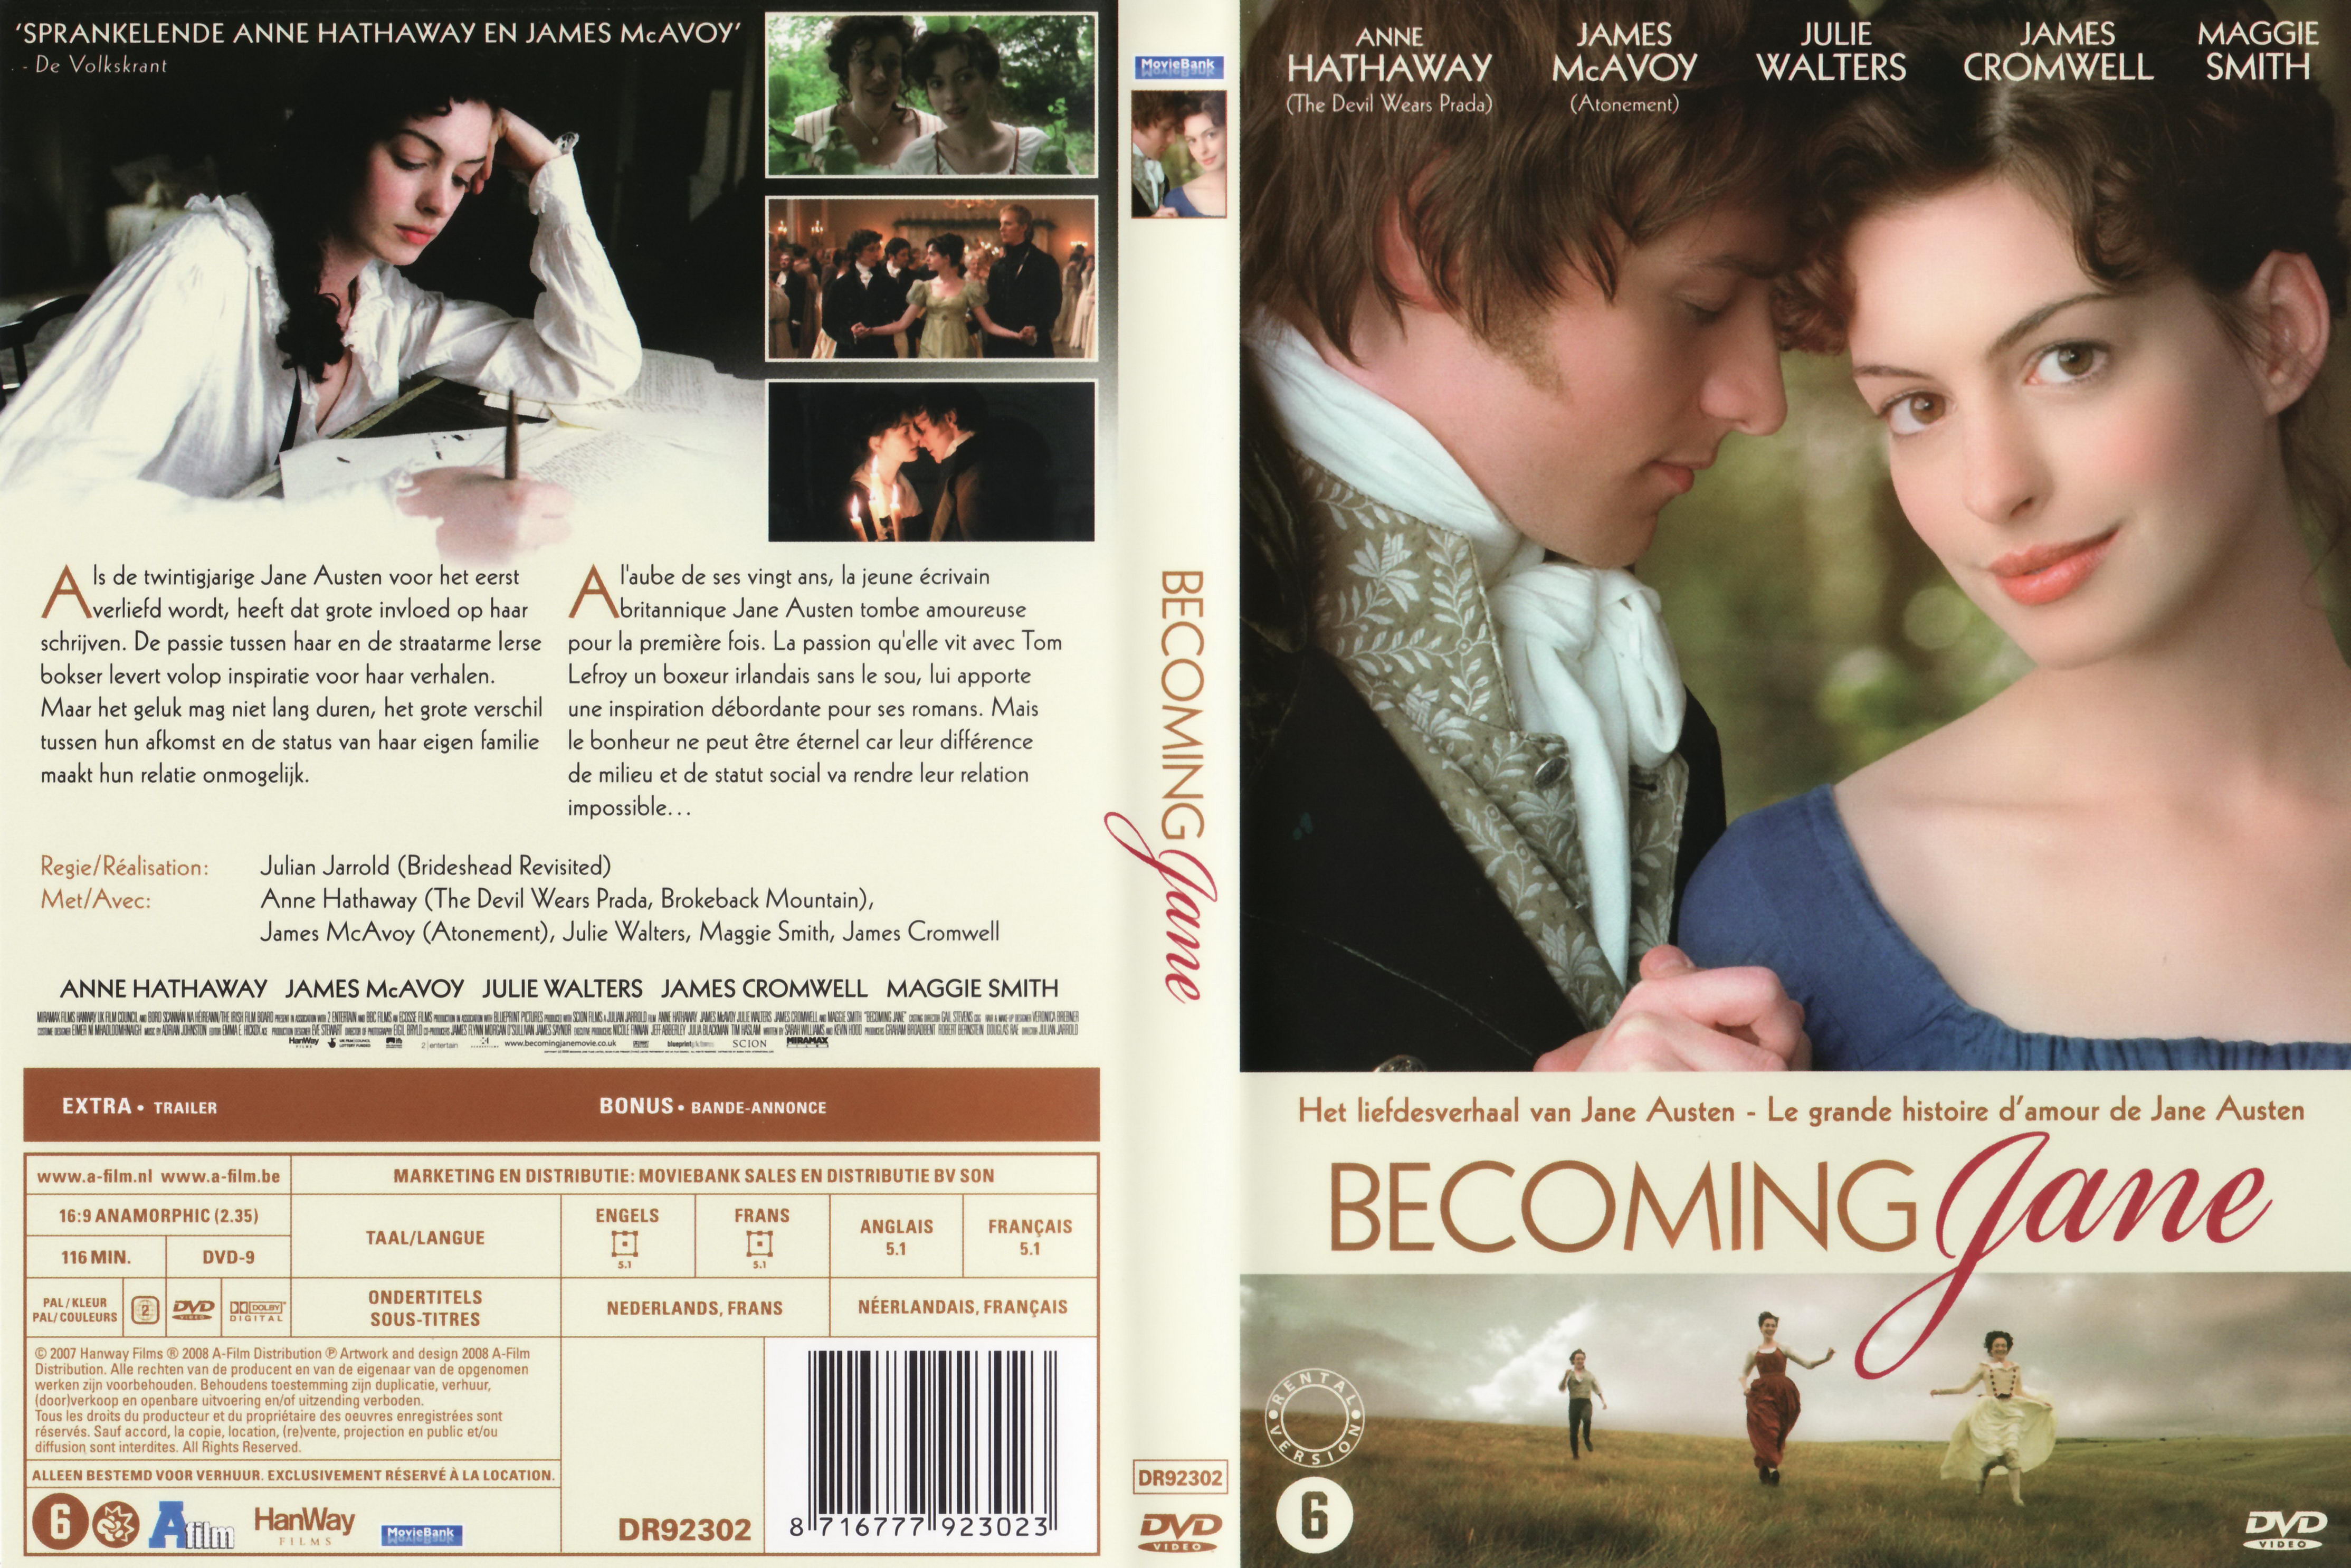 Jaquette DVD Becoming Jane